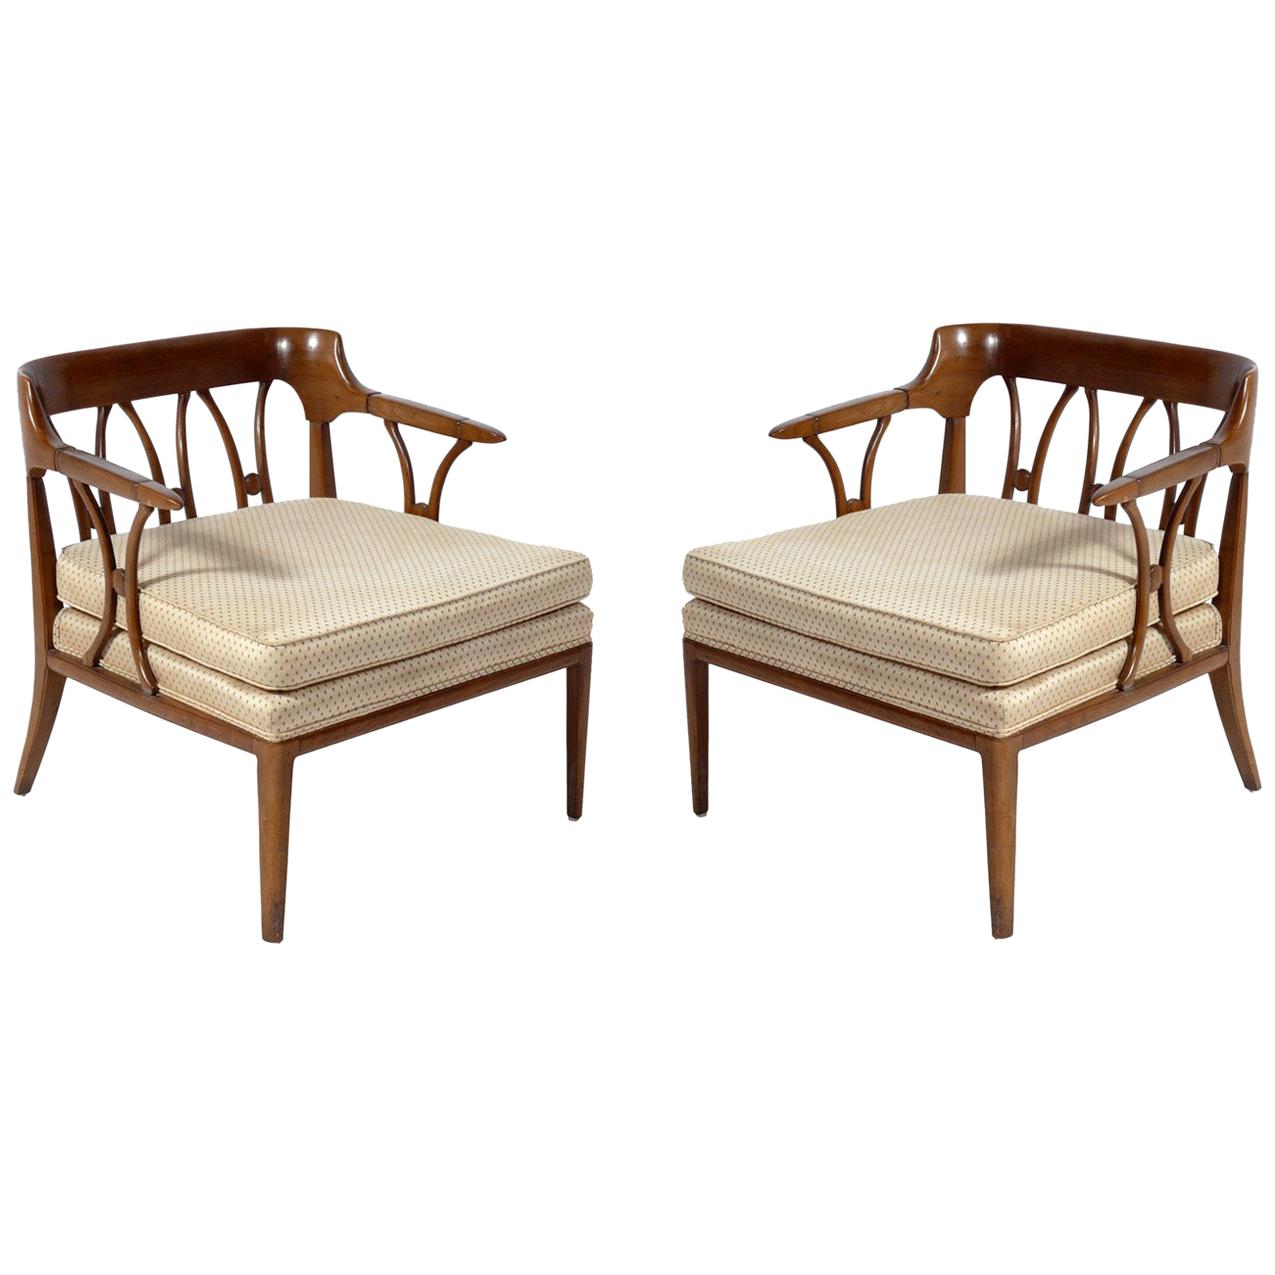 Pair of Sculptural Fret Back Lounge Chairs by Tomlinson